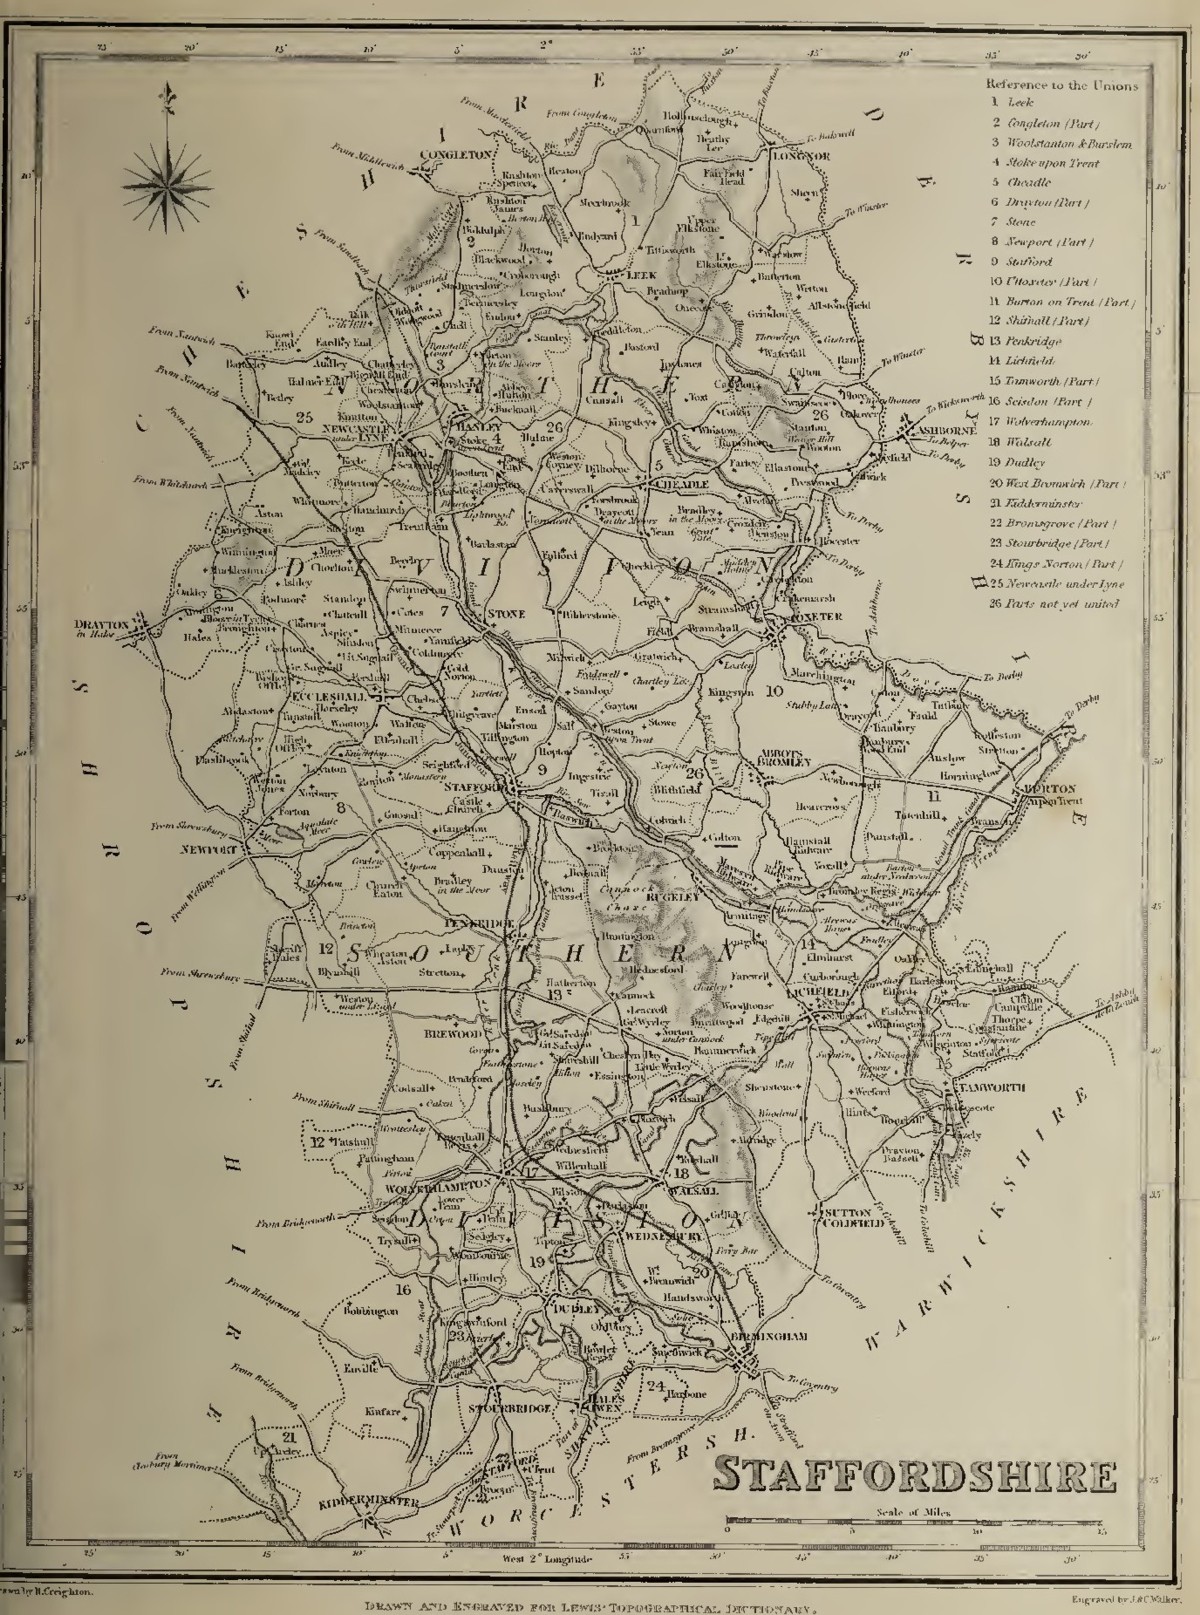 Staffordshire County Map in 1859